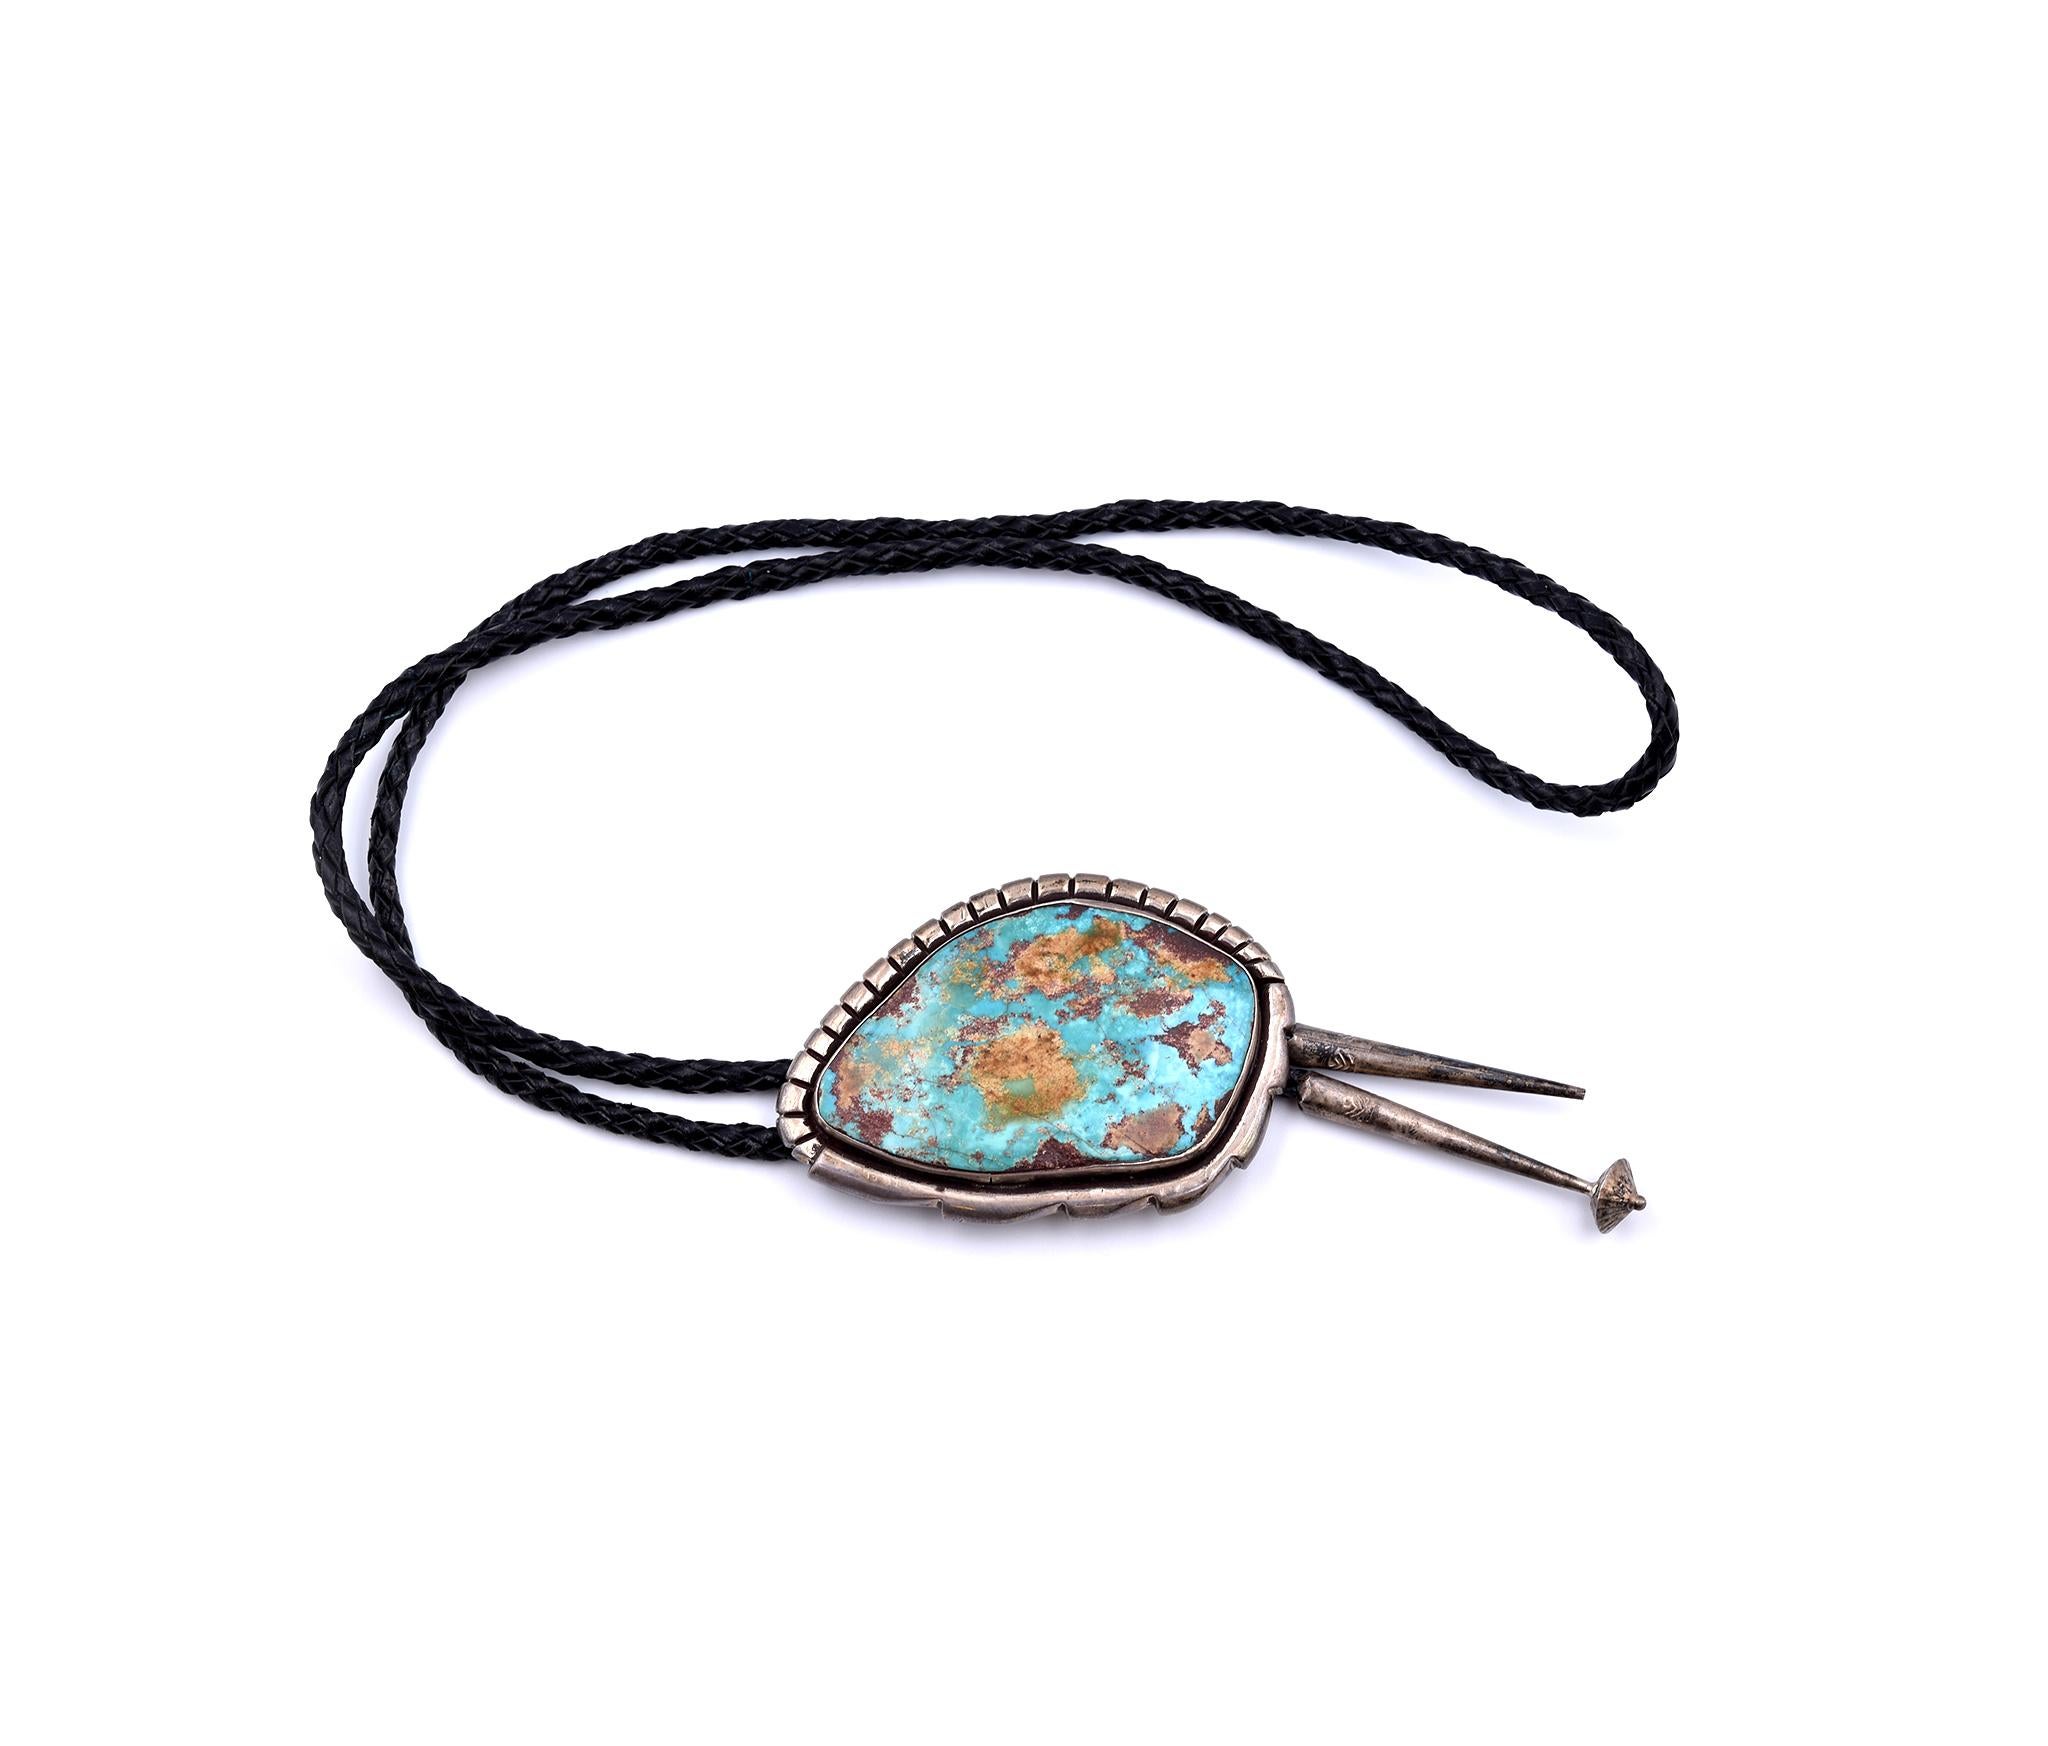 Lanxy Vintage Native American Round Celtic Blue Turquoise Stone Bolo Tie Silver Tone 